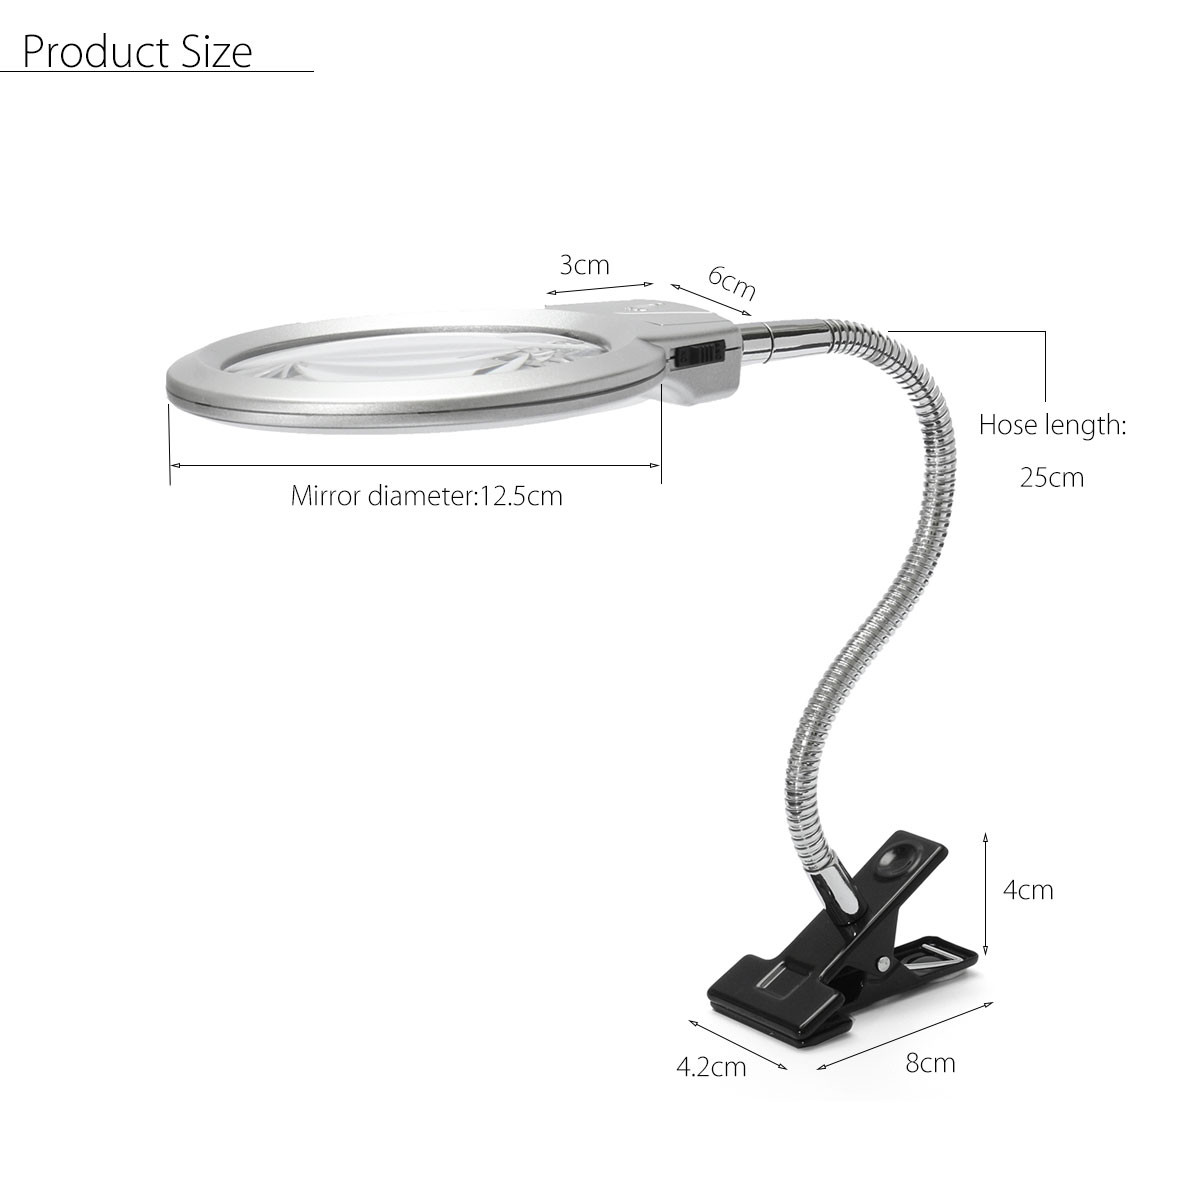 New-25-x-90MM-5-x-22MM-2-LED-Lighted-Table-Top-Desk-Magnifier-Magnifying-Glass-with-Clamp-1075605-10